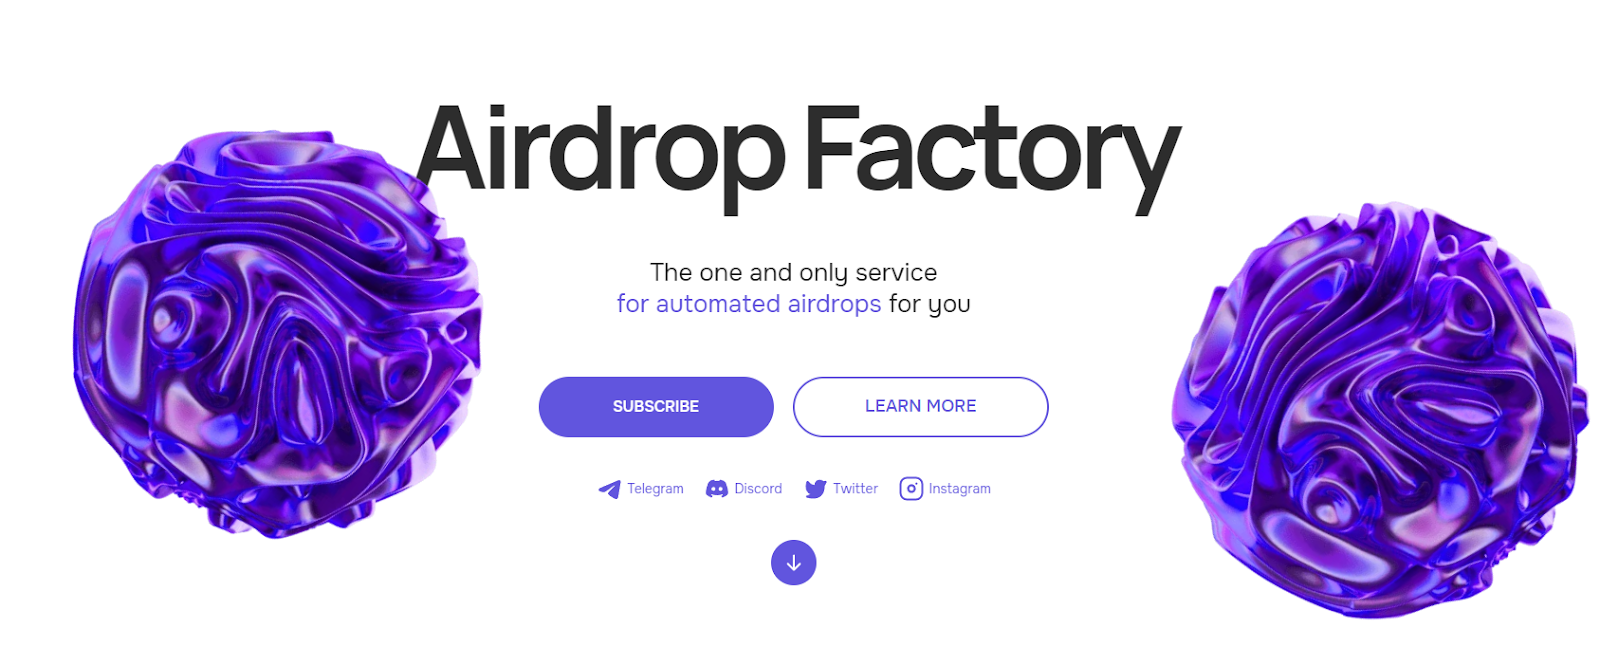 airdrop factory